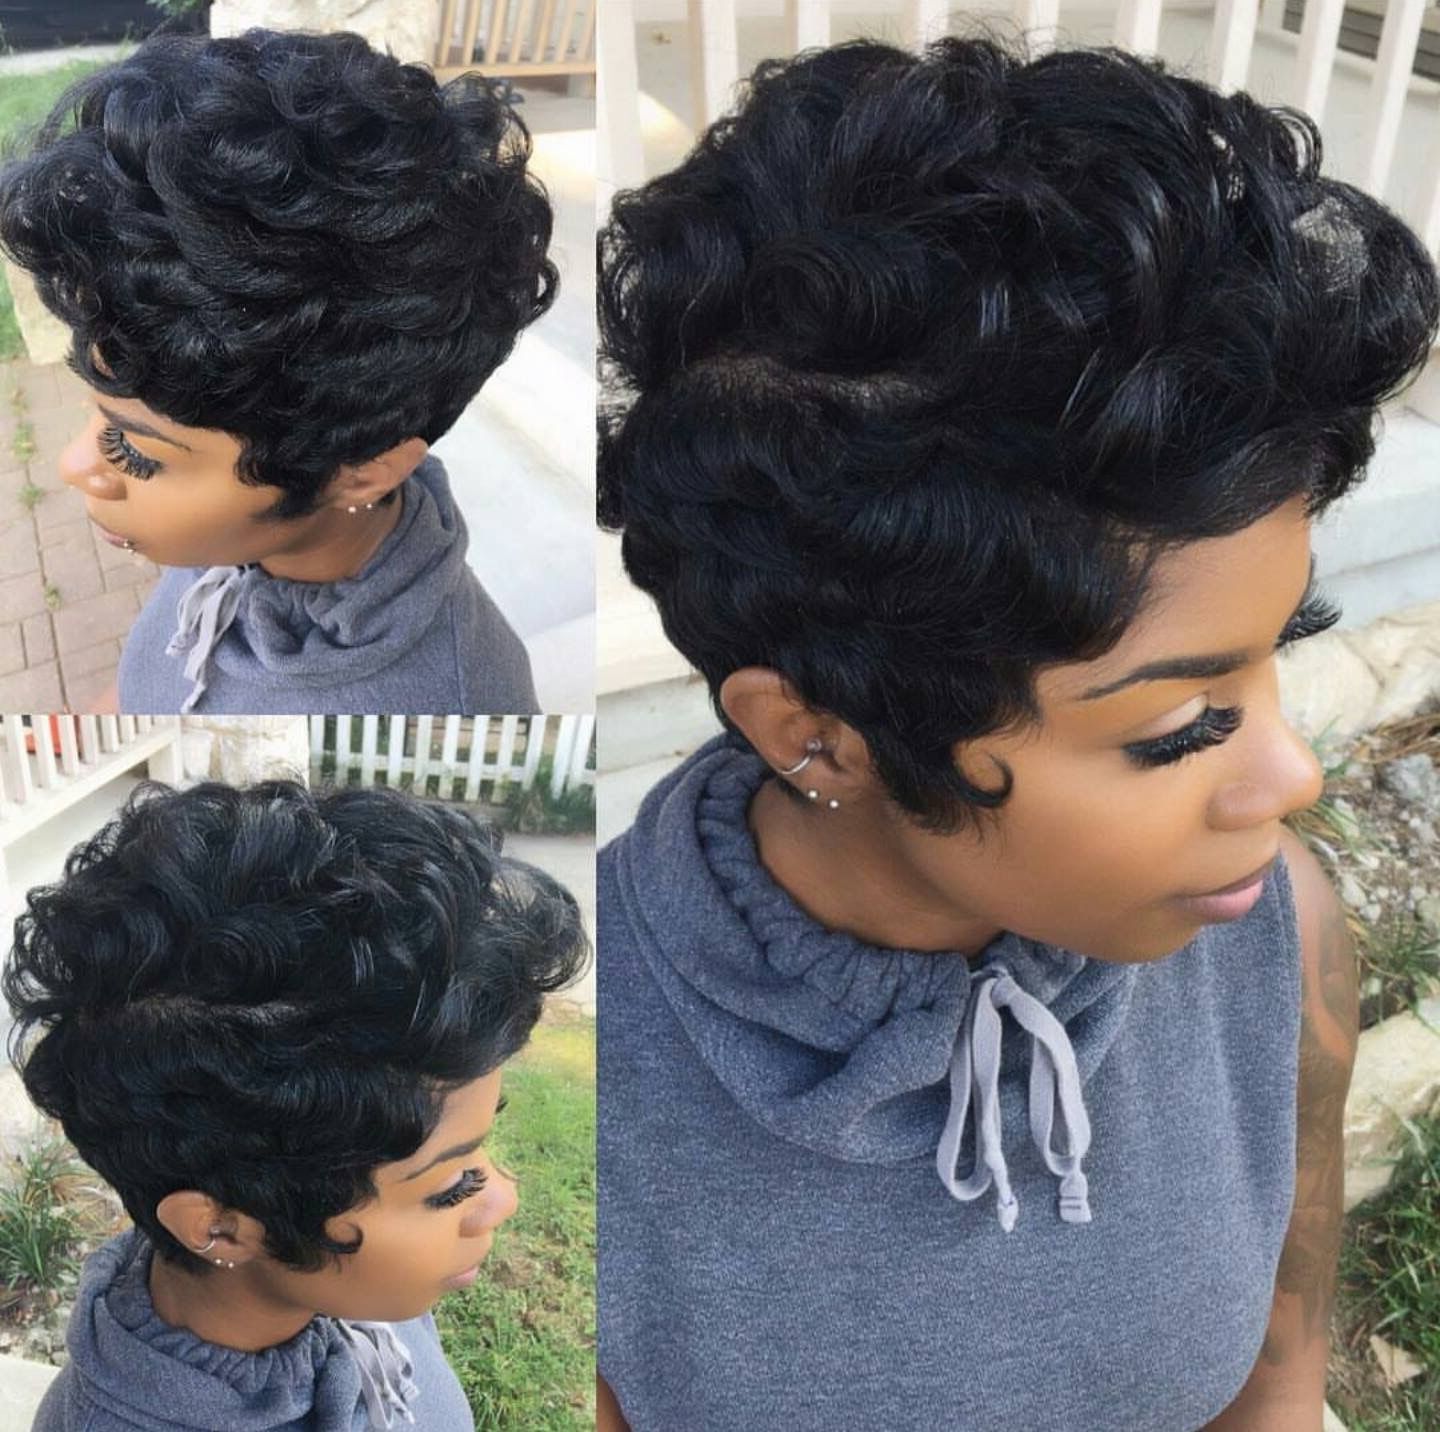 Cute Stlye ! … | Pinteres… Pertaining To Most Current Short Pixie Hairstyles For Black Hair (View 6 of 15)